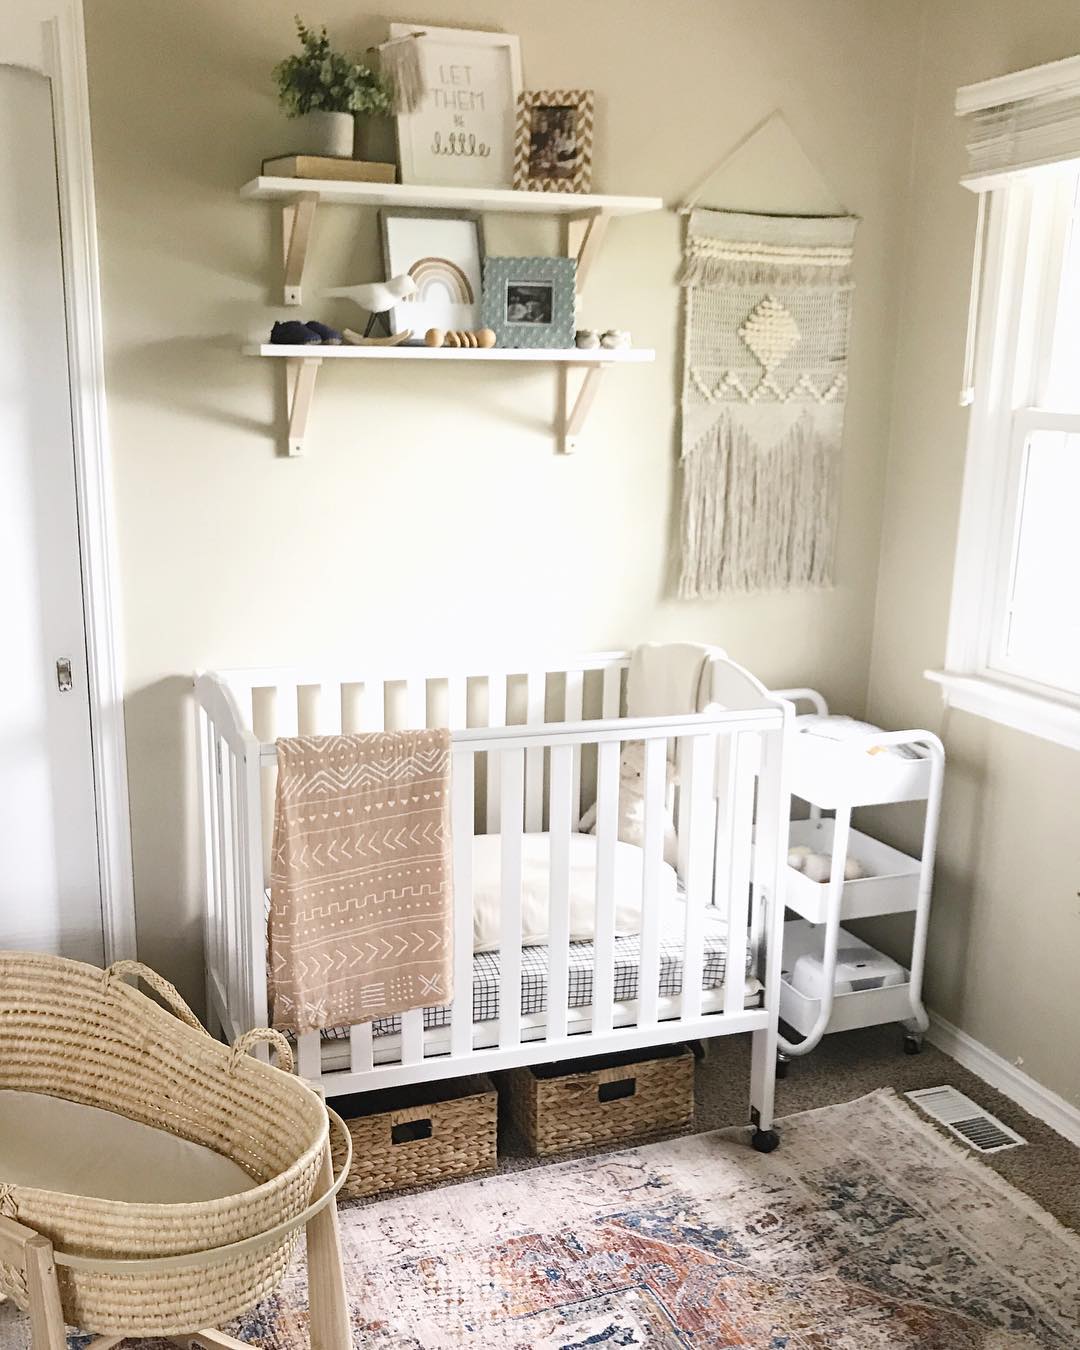 Small Crib in Childrens Room. Photo by Instagram user @amandalippeblog